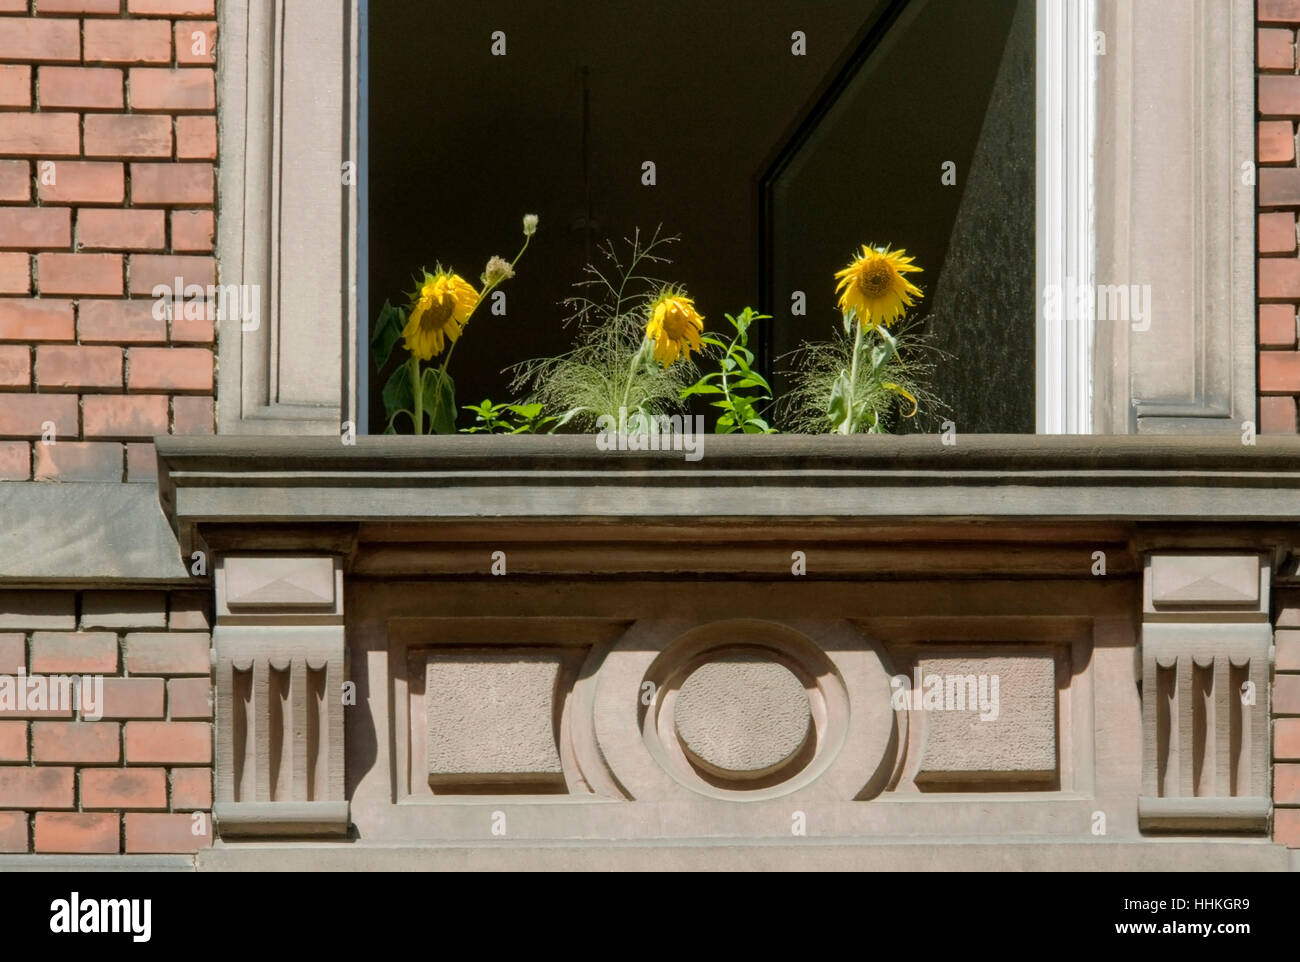 some sunflowers in front of a opened window.Outdoor shot in sunny ambiance Stock Photo